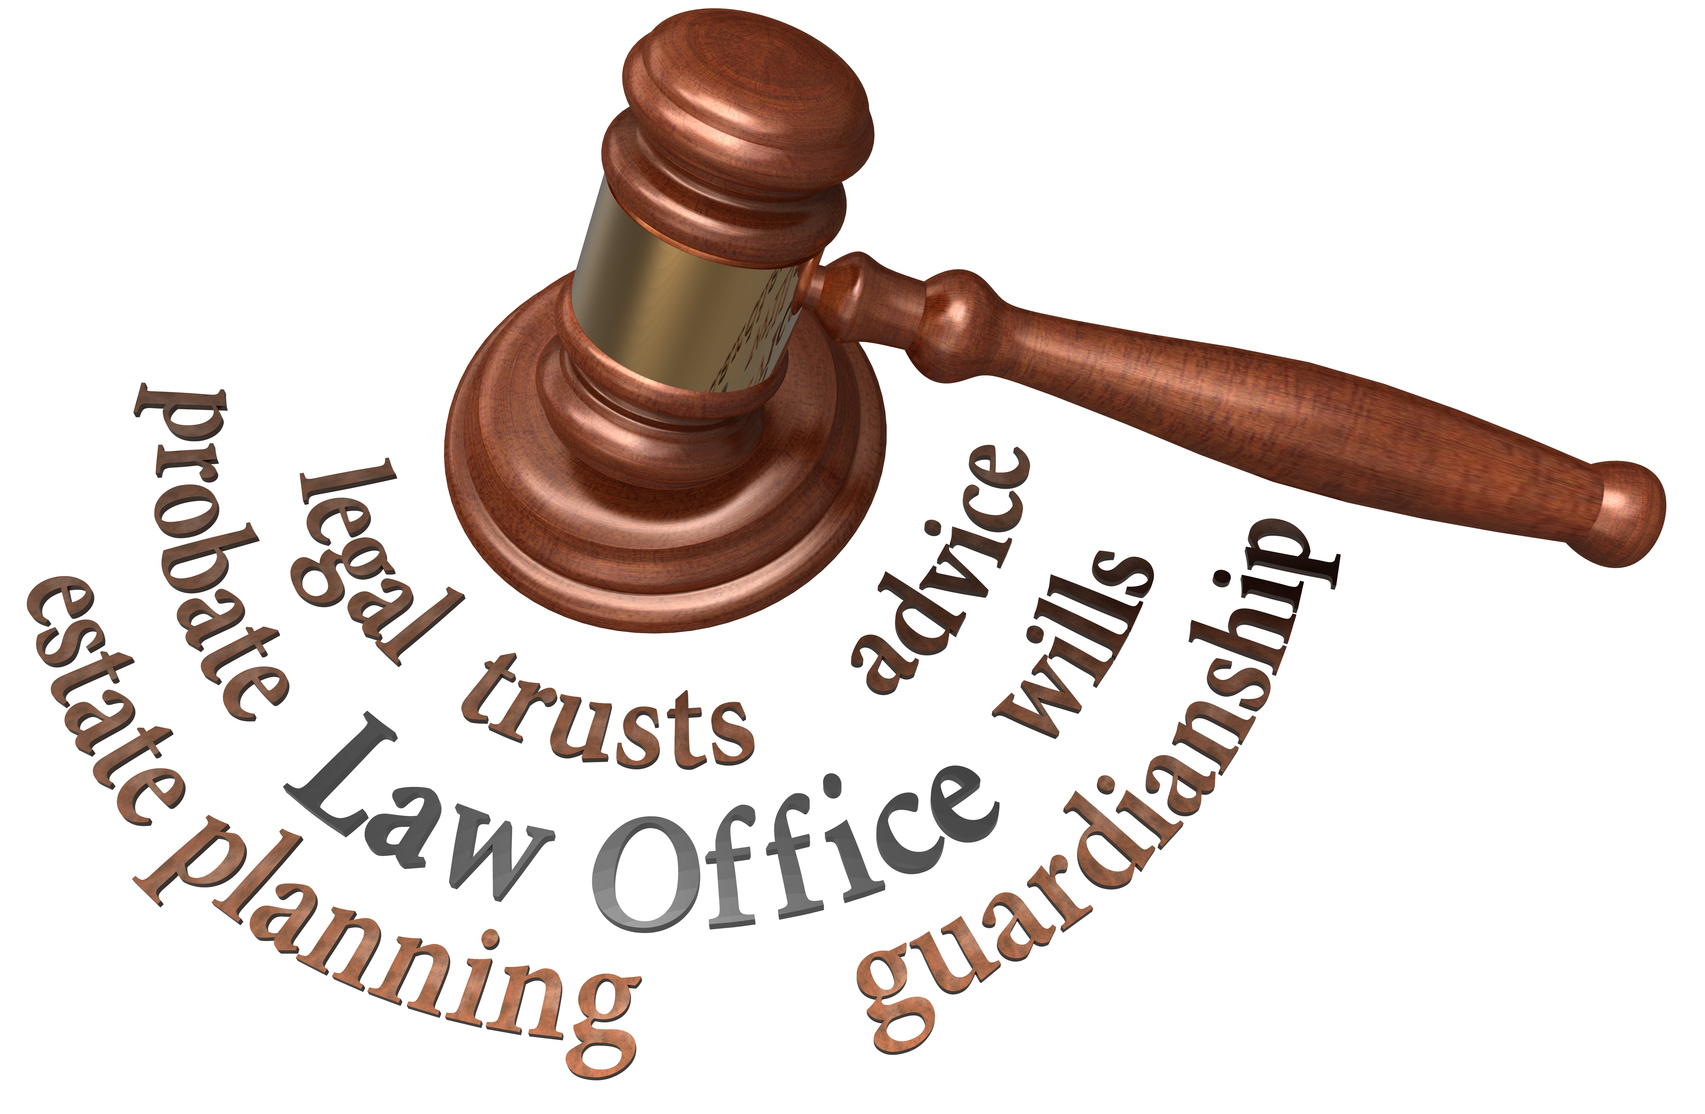 Gavel with legal concepts of estate planning probate wills attorney